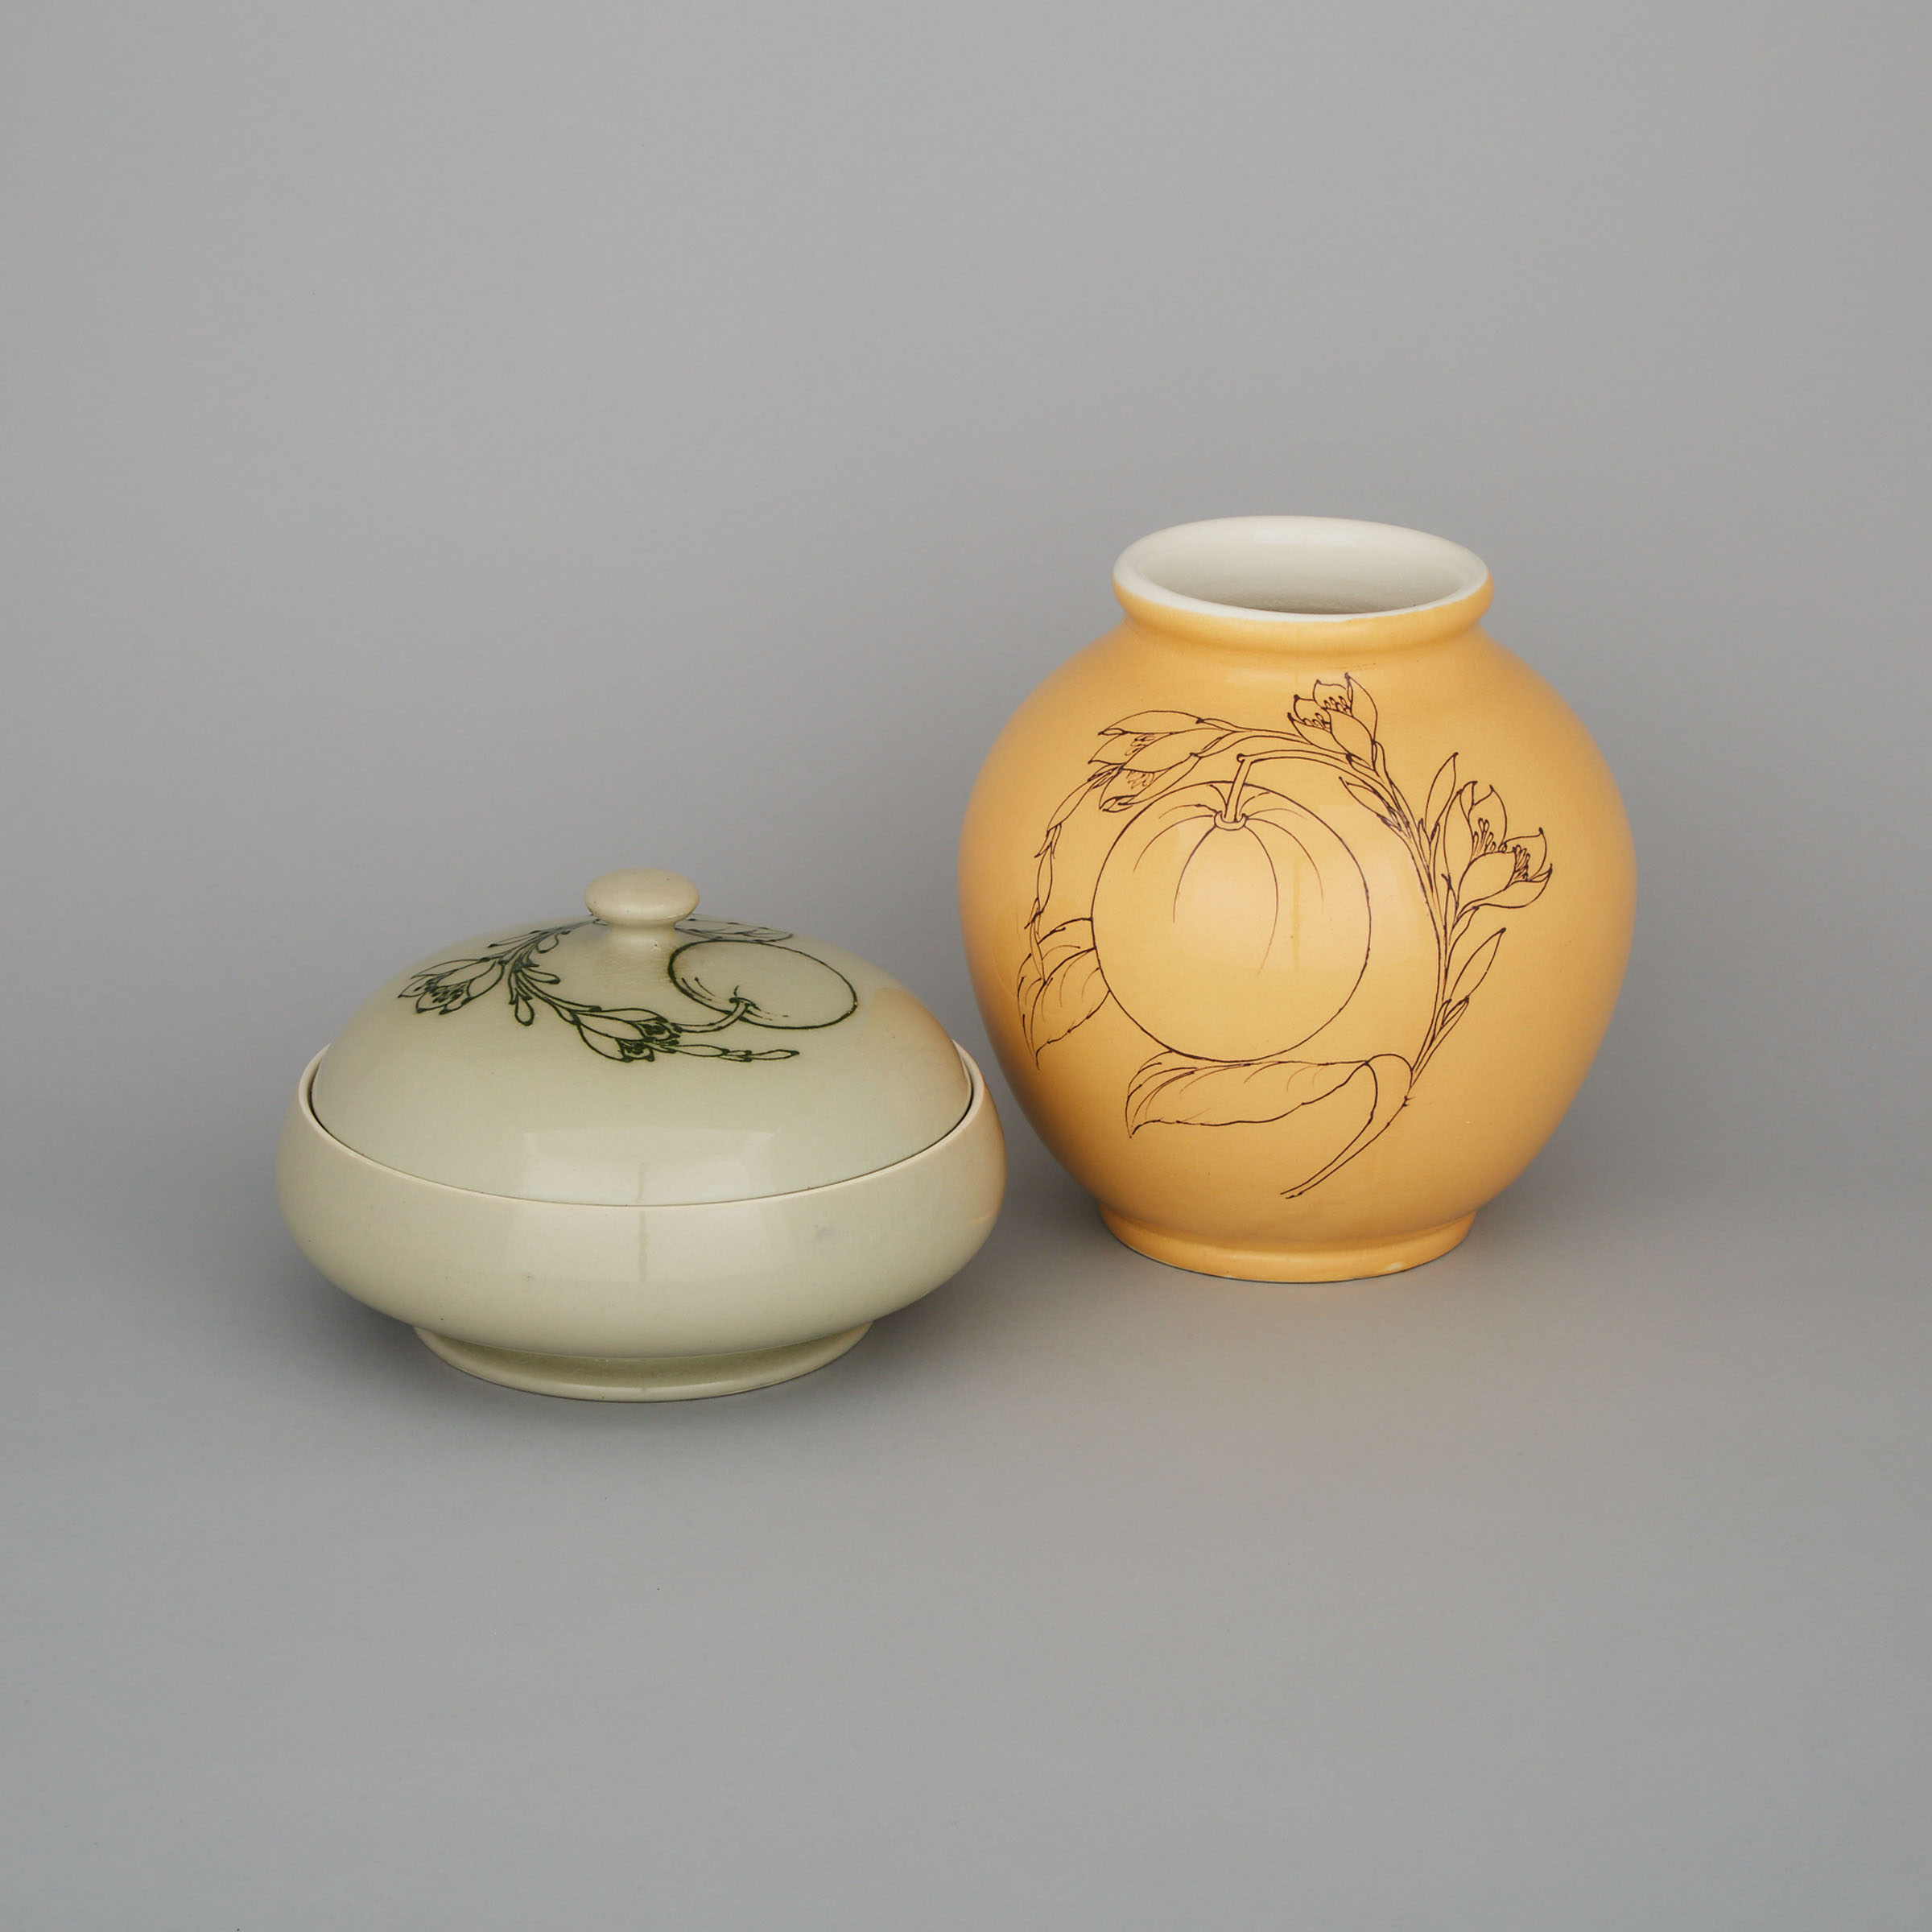 Moorcroft Simplified Orange and Blossom Vase and Covered Dish, 1930s